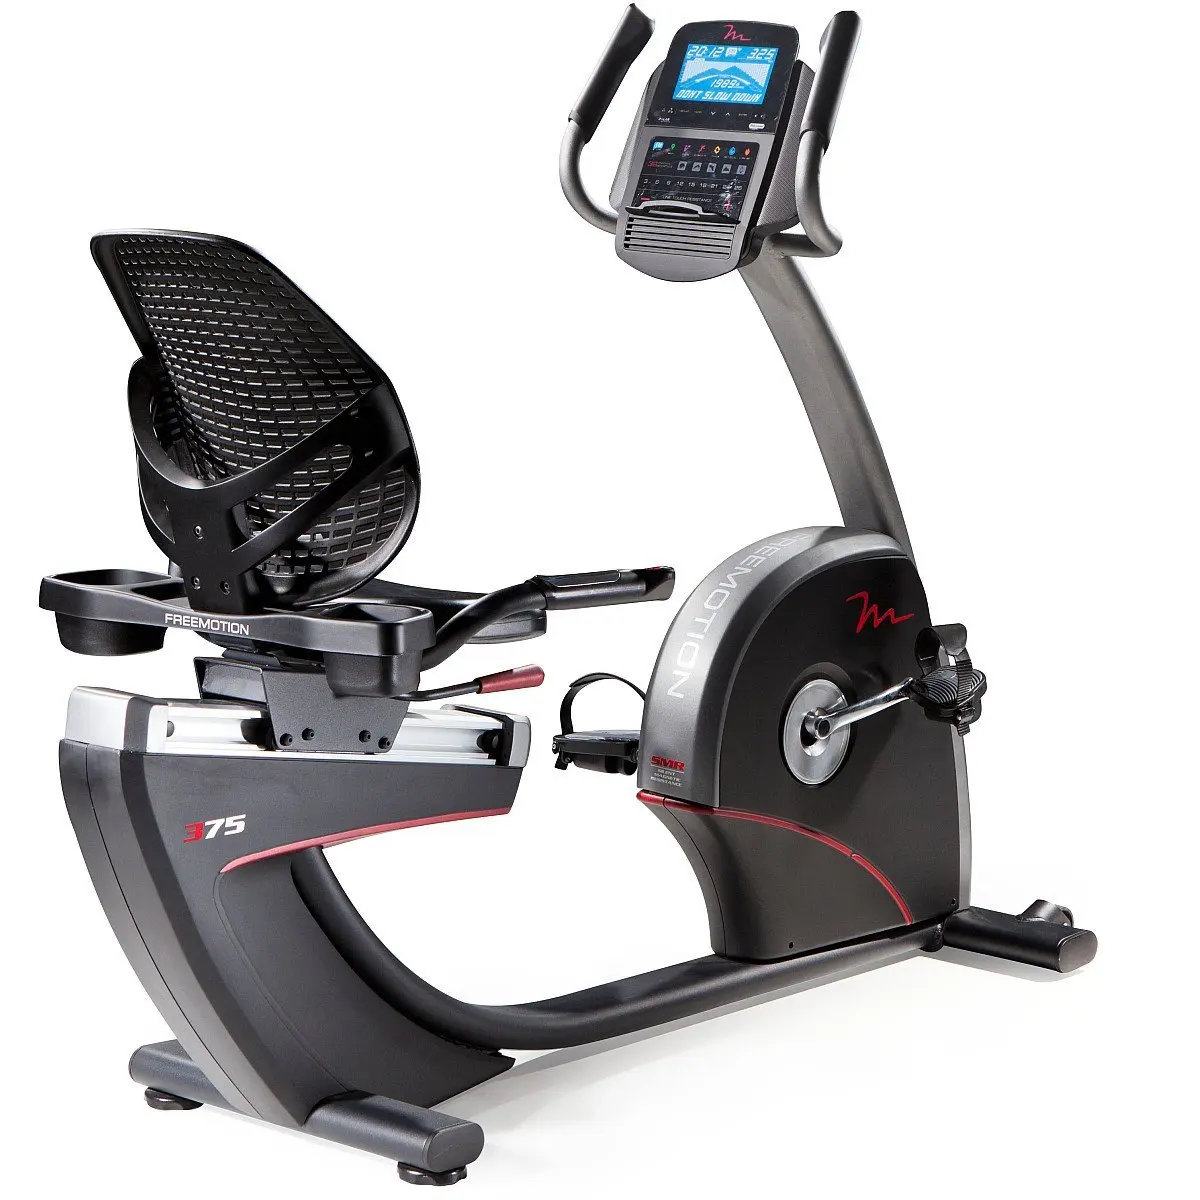 Cheap Freemotion 335r Exercise Bike Find Freemotion 335r Exercise Bike Deals On Line At Alibaba Com Shop for exercise bikes in exercise machines. cheap freemotion 335r exercise bike